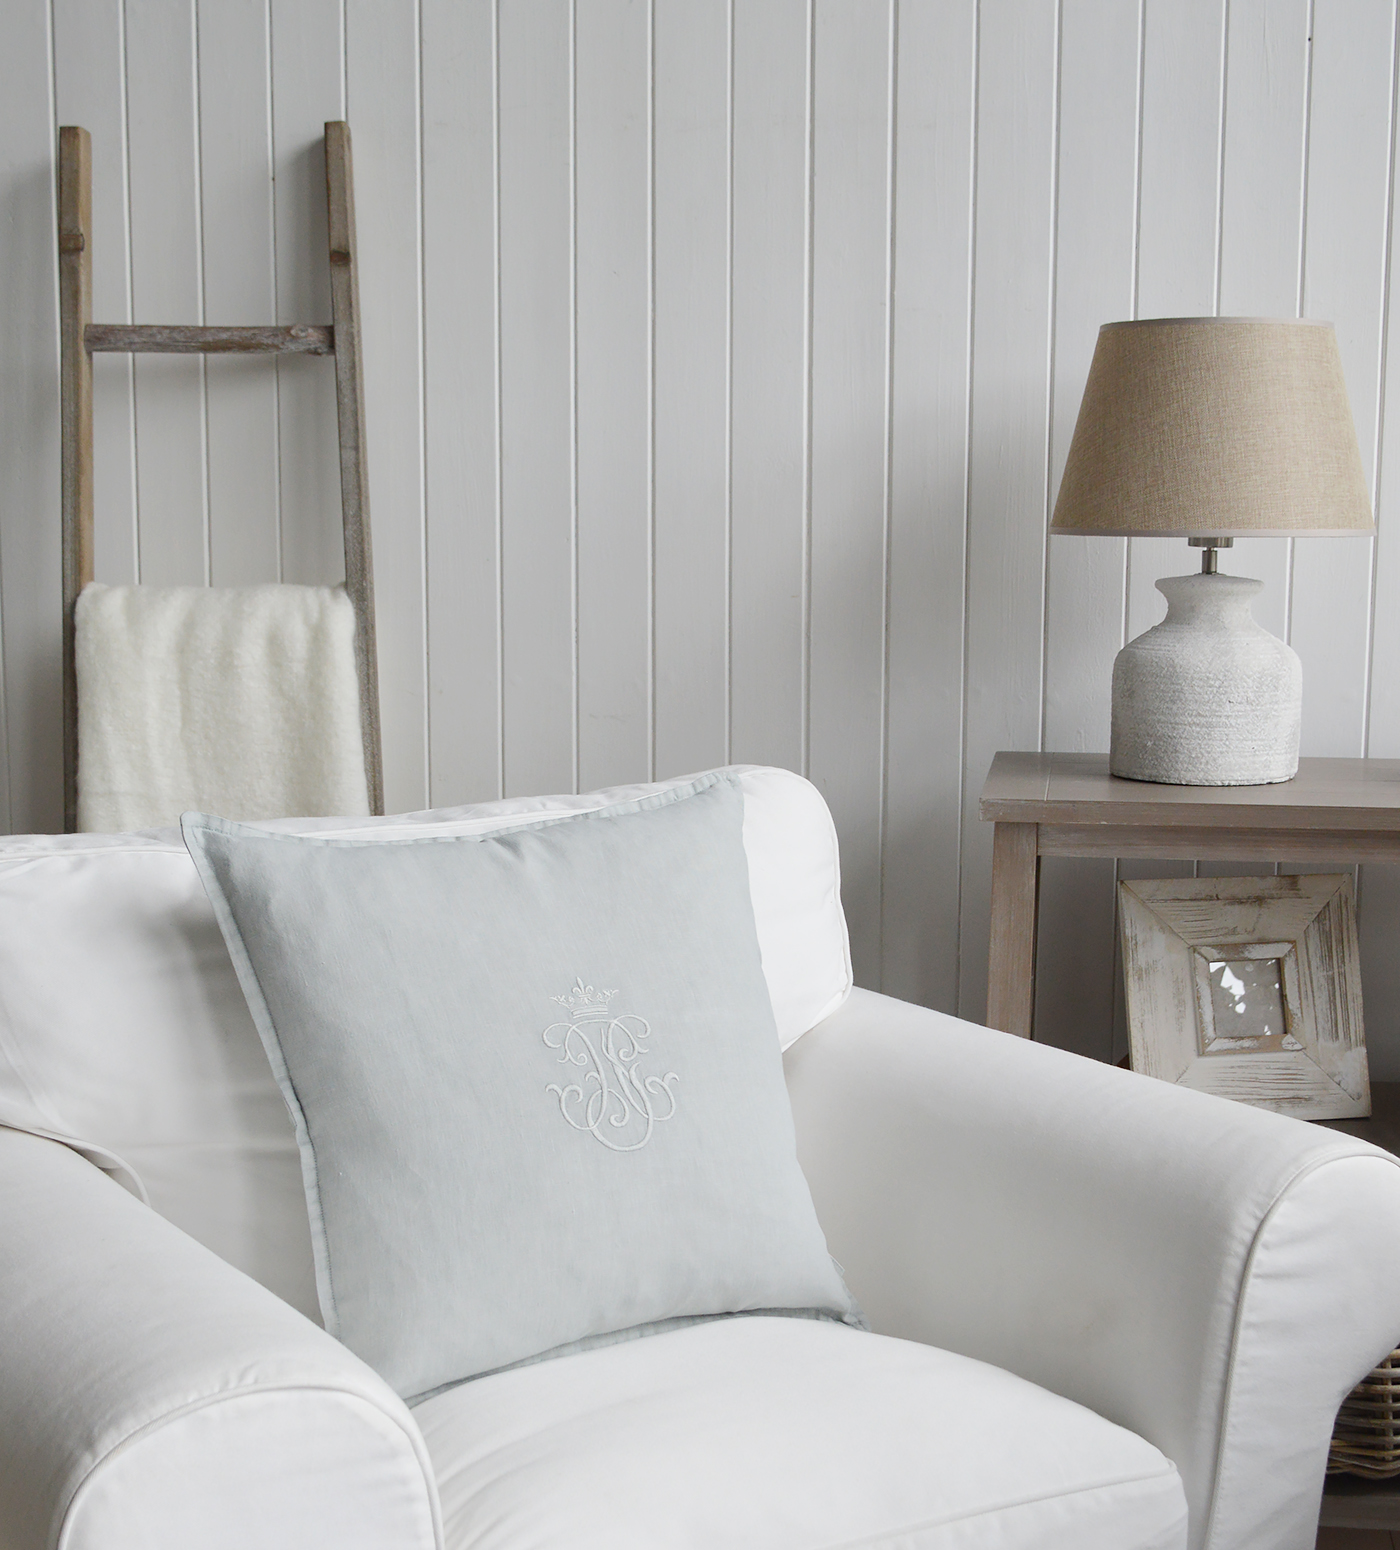 Richmond Linen Filled Cushion in Pale Duck Egg - New England style Cushions